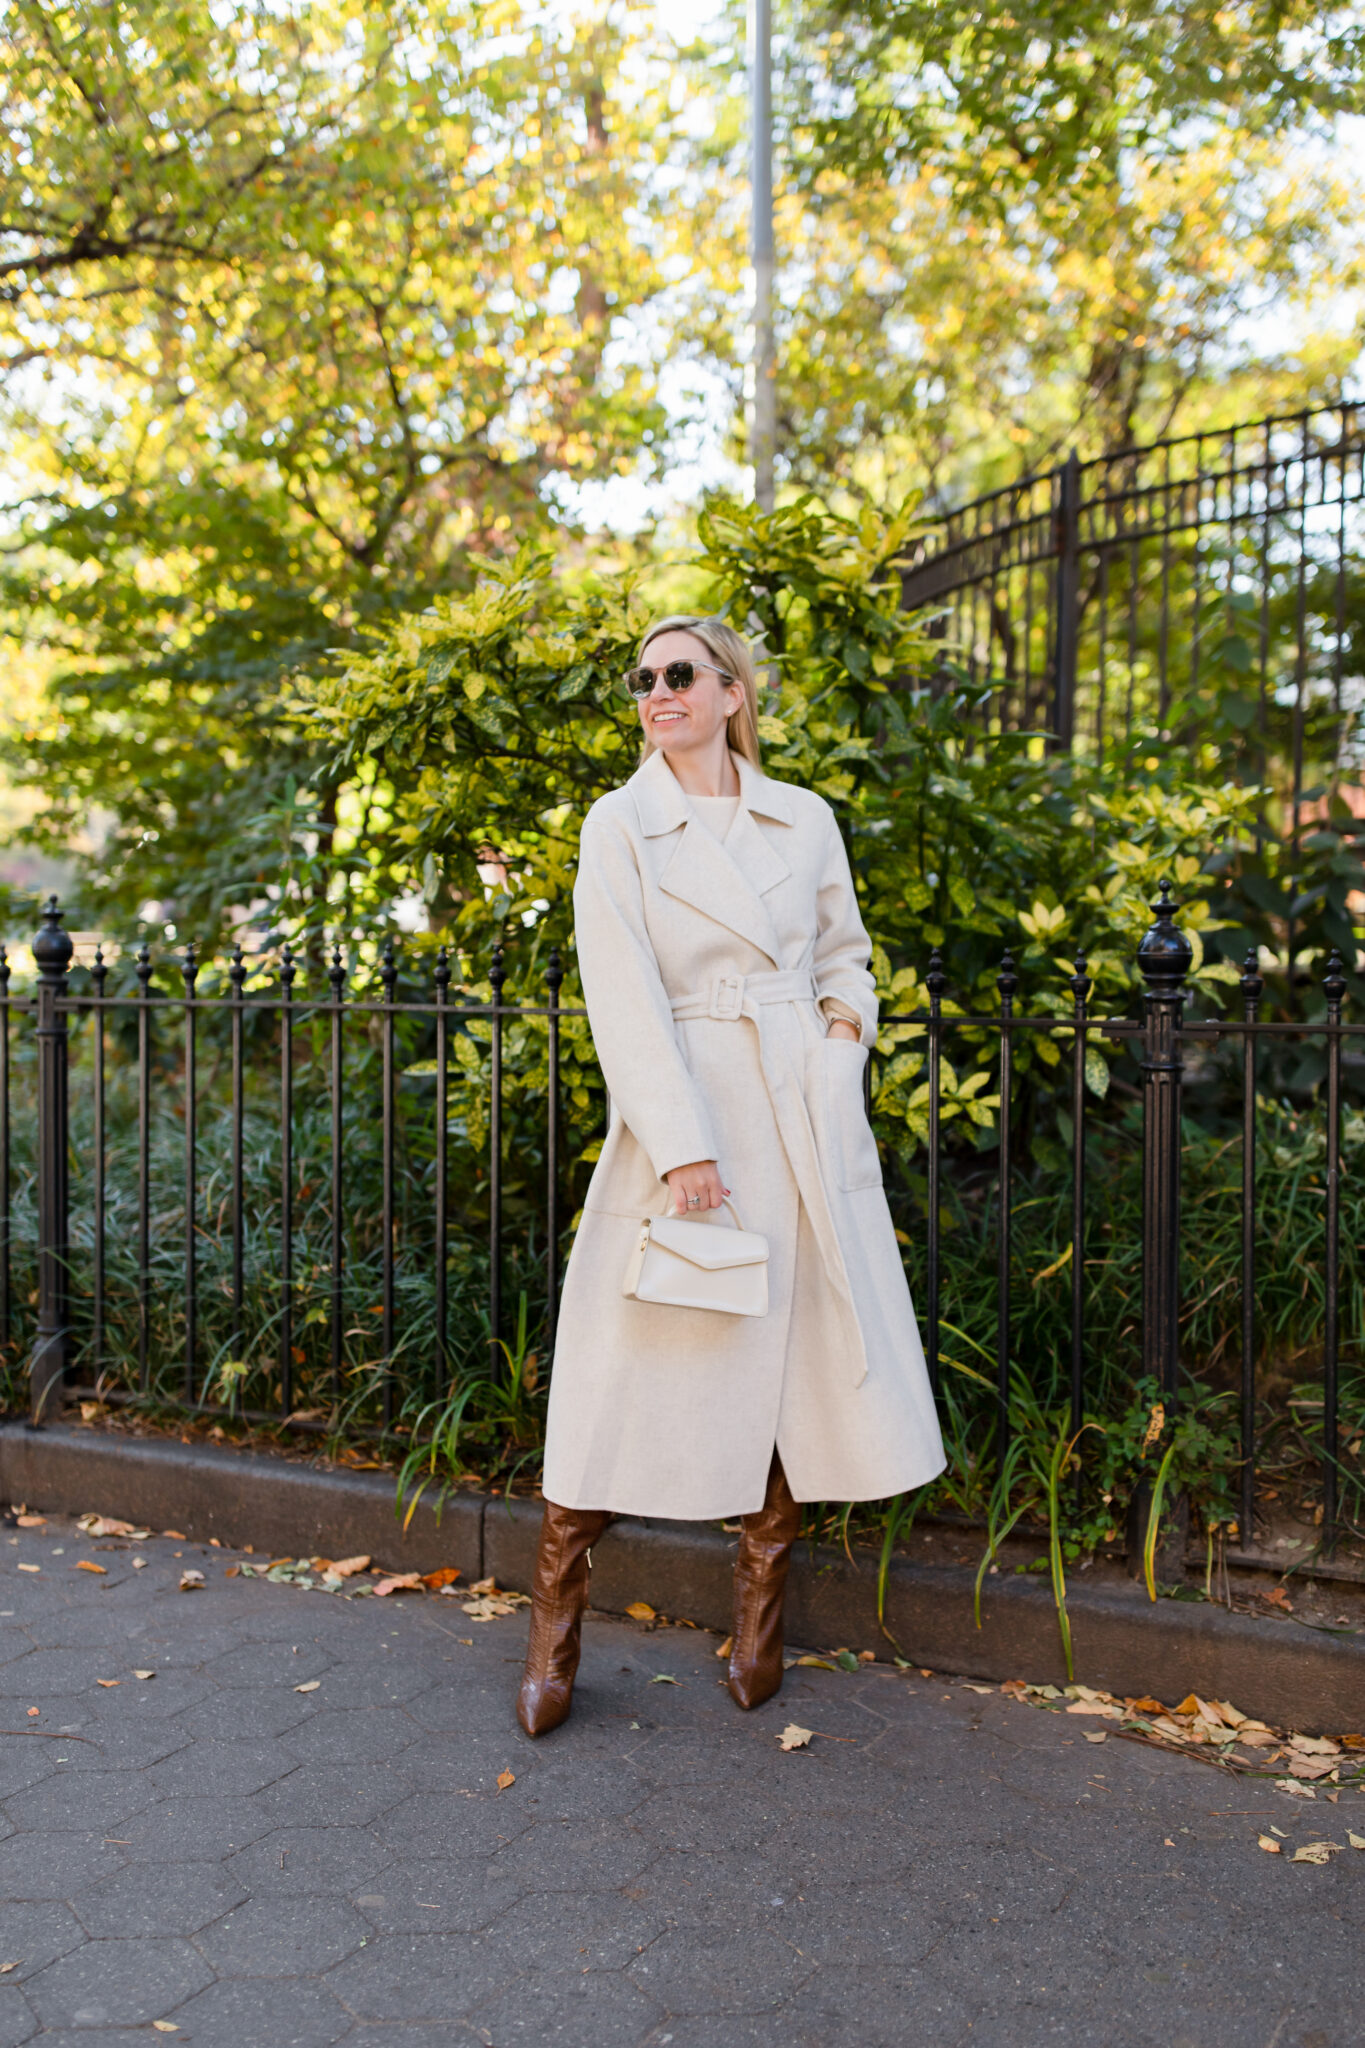 Wool Coats For The Winter